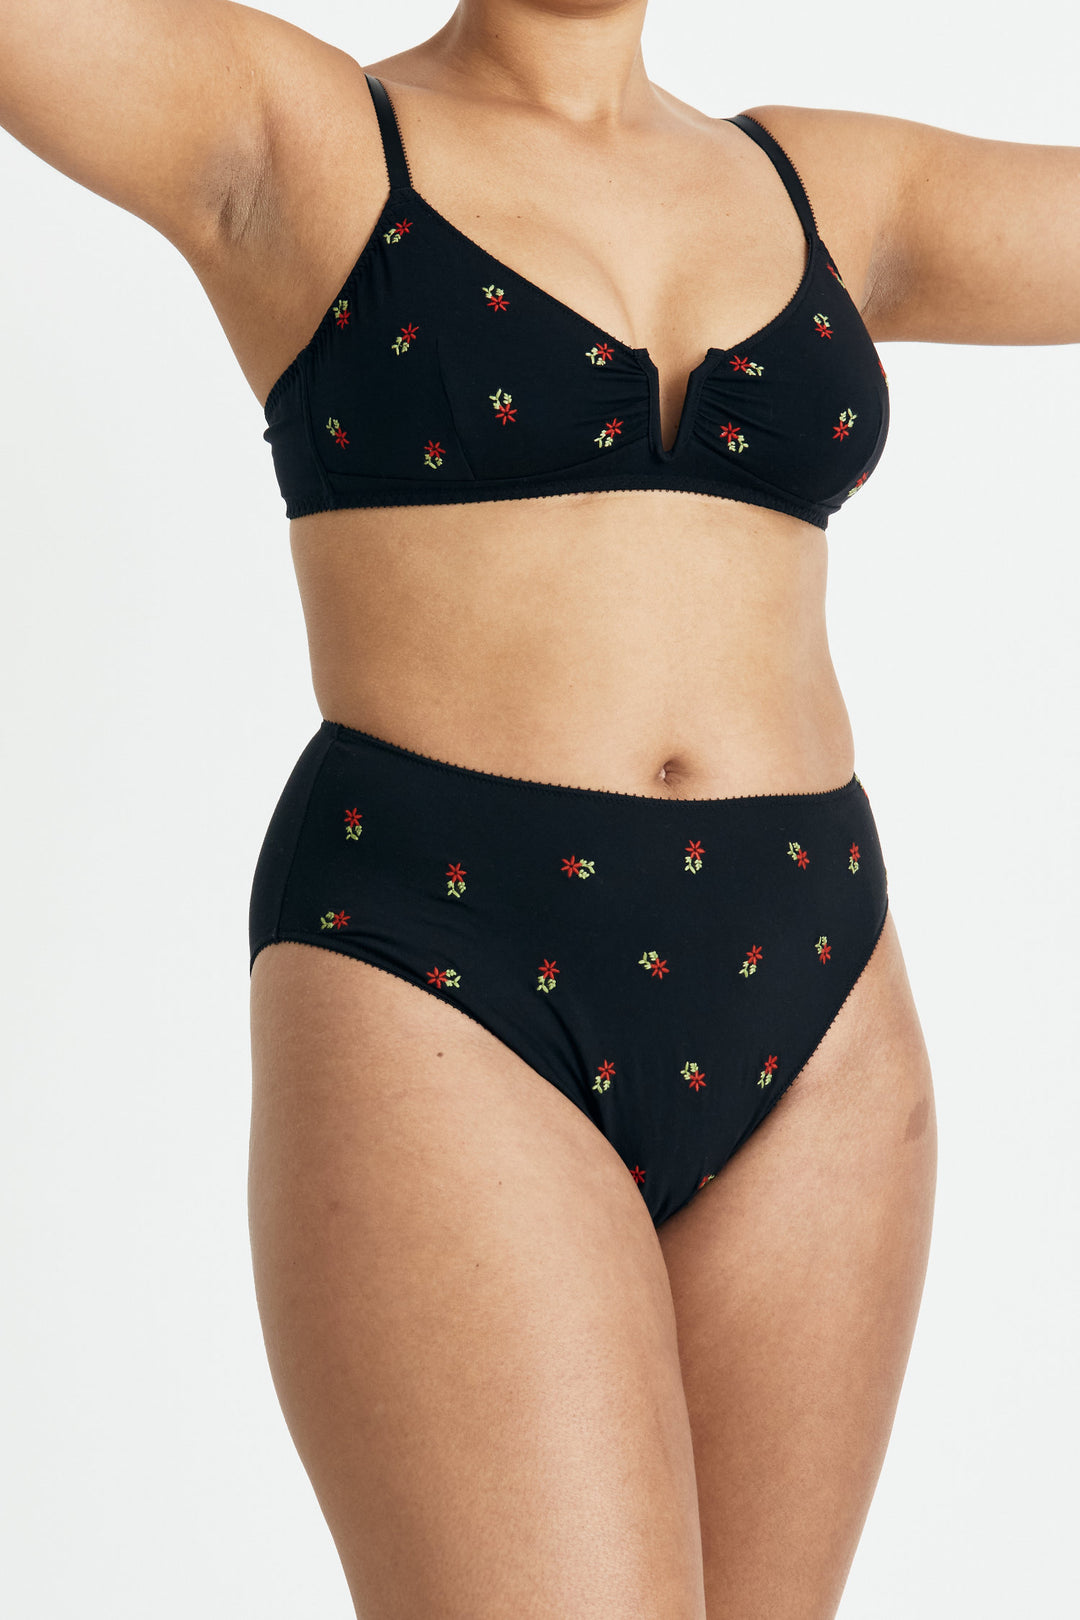 Videris Lingerie Angela wire free black soft cup bra in embroidered TENCEL™ features a triangle shaped cup and front gathers